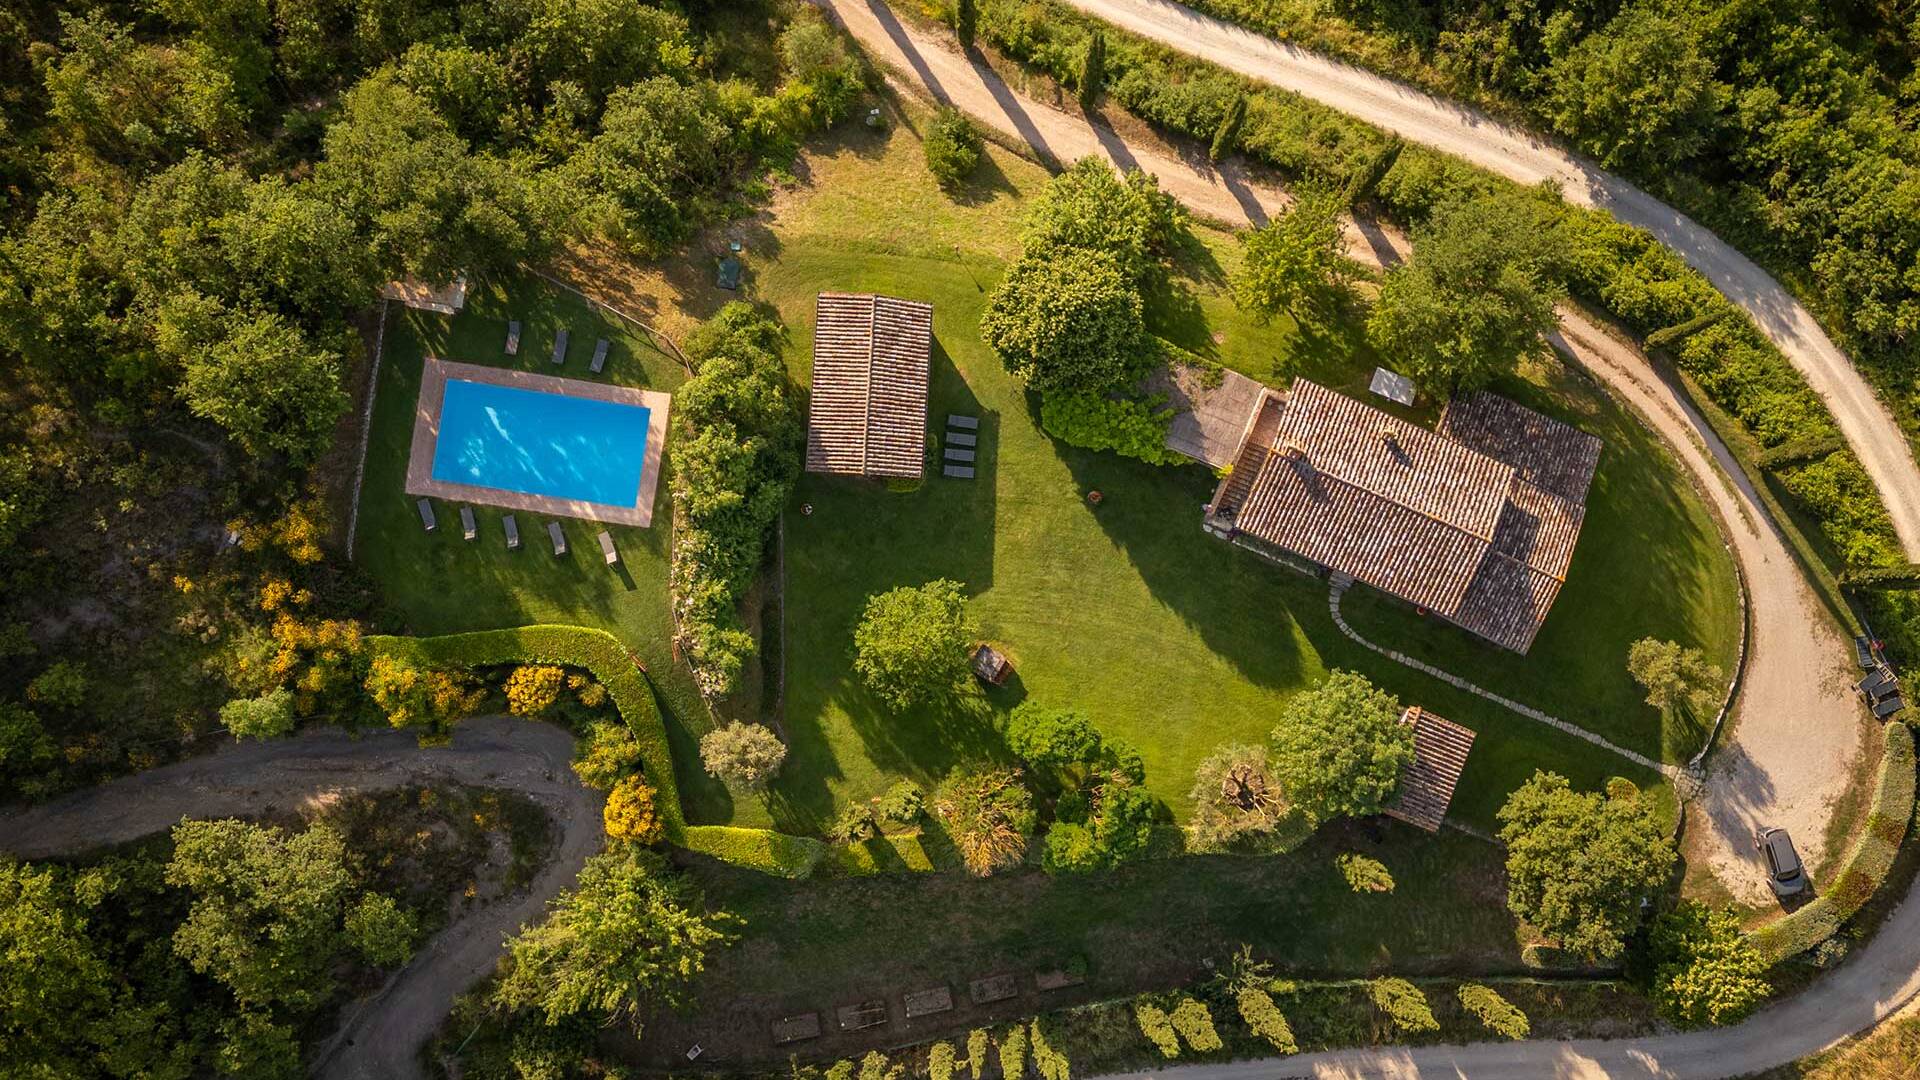 luxury villa Arcelle for rent in Umbria, aerial view